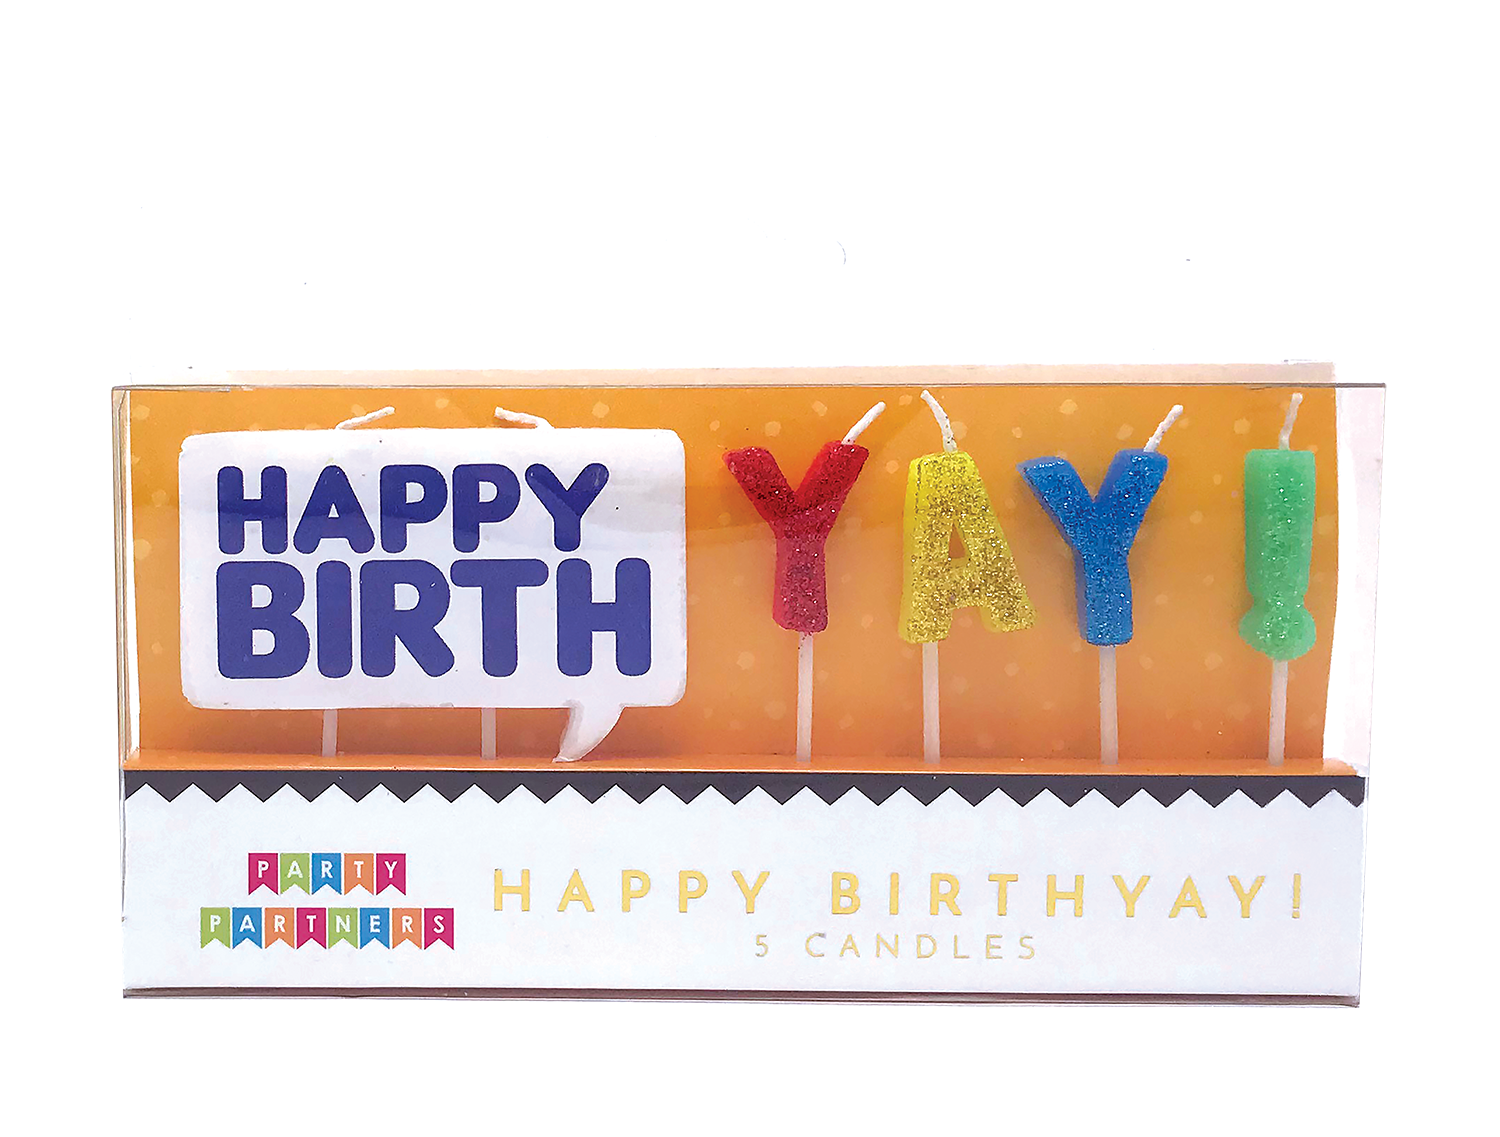 Happy Birthyay! Letter Glitter Decal Candle set Party Partners - Cardmore